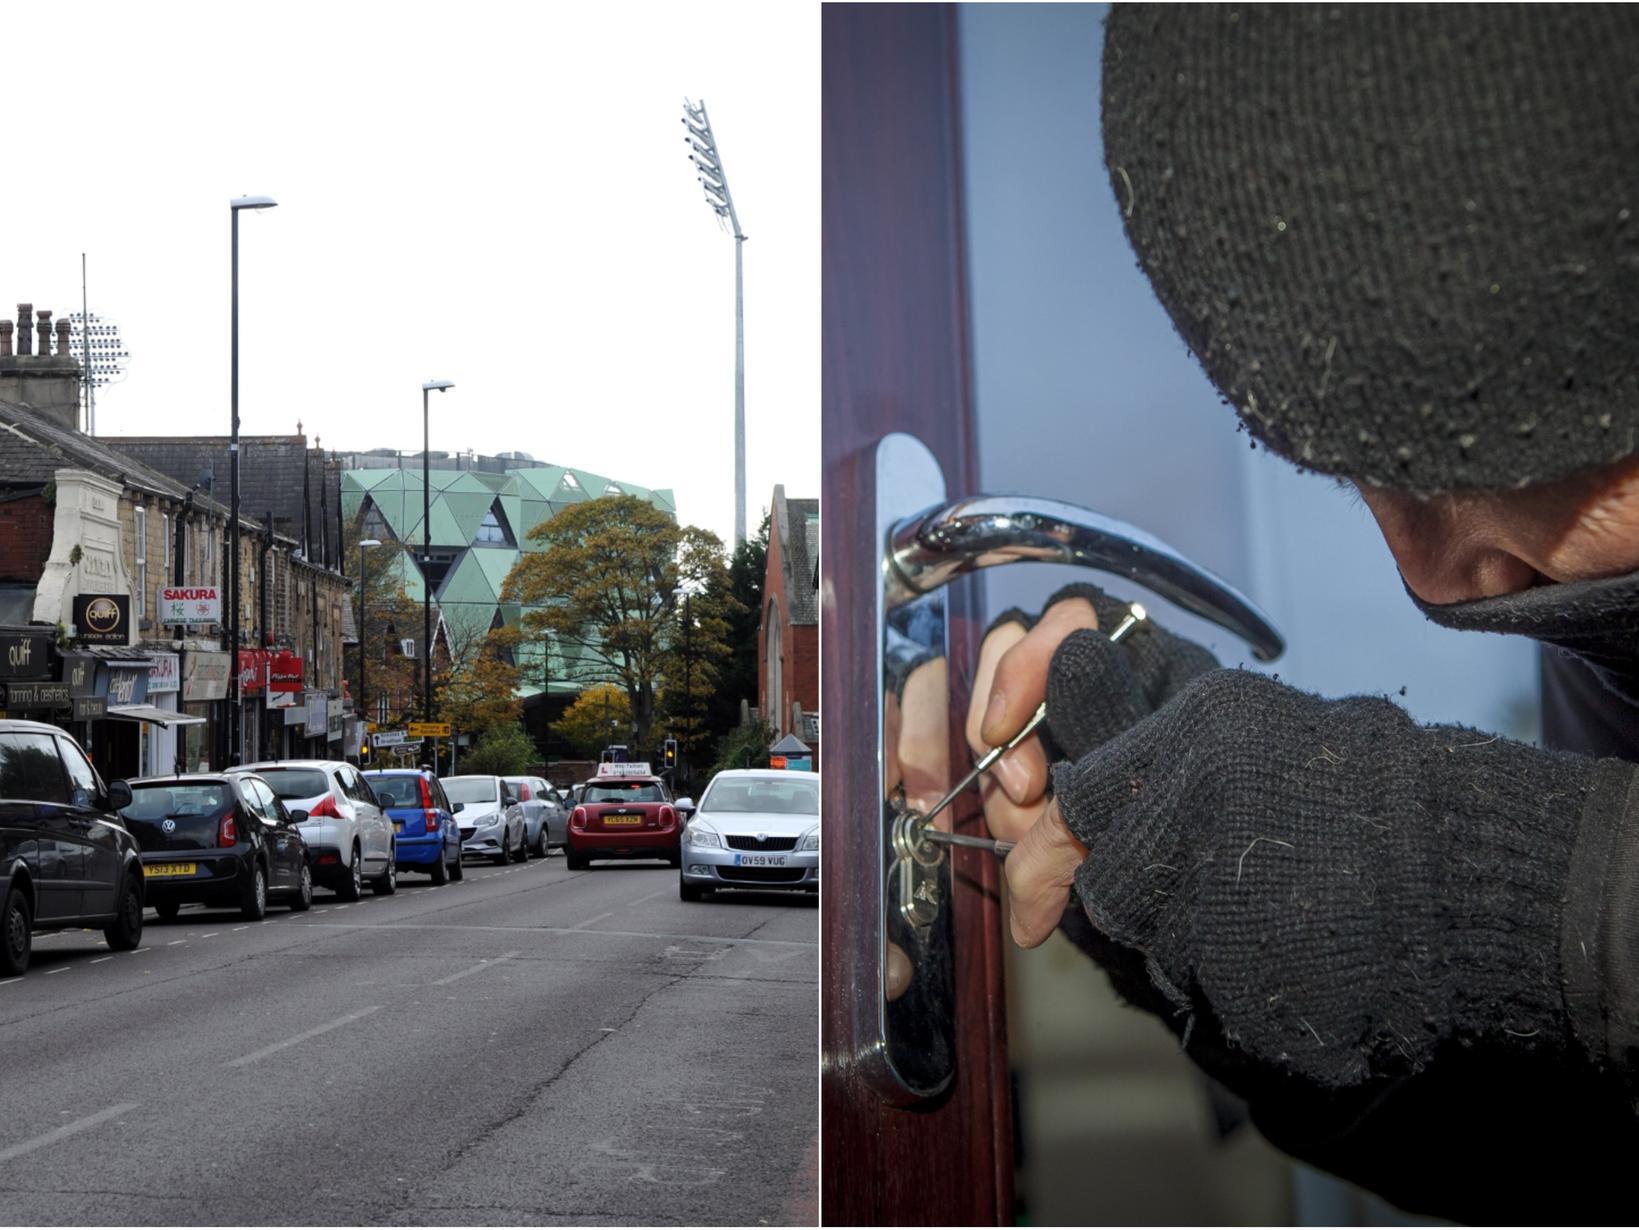 The nine most burgled areas in Leeds revealed